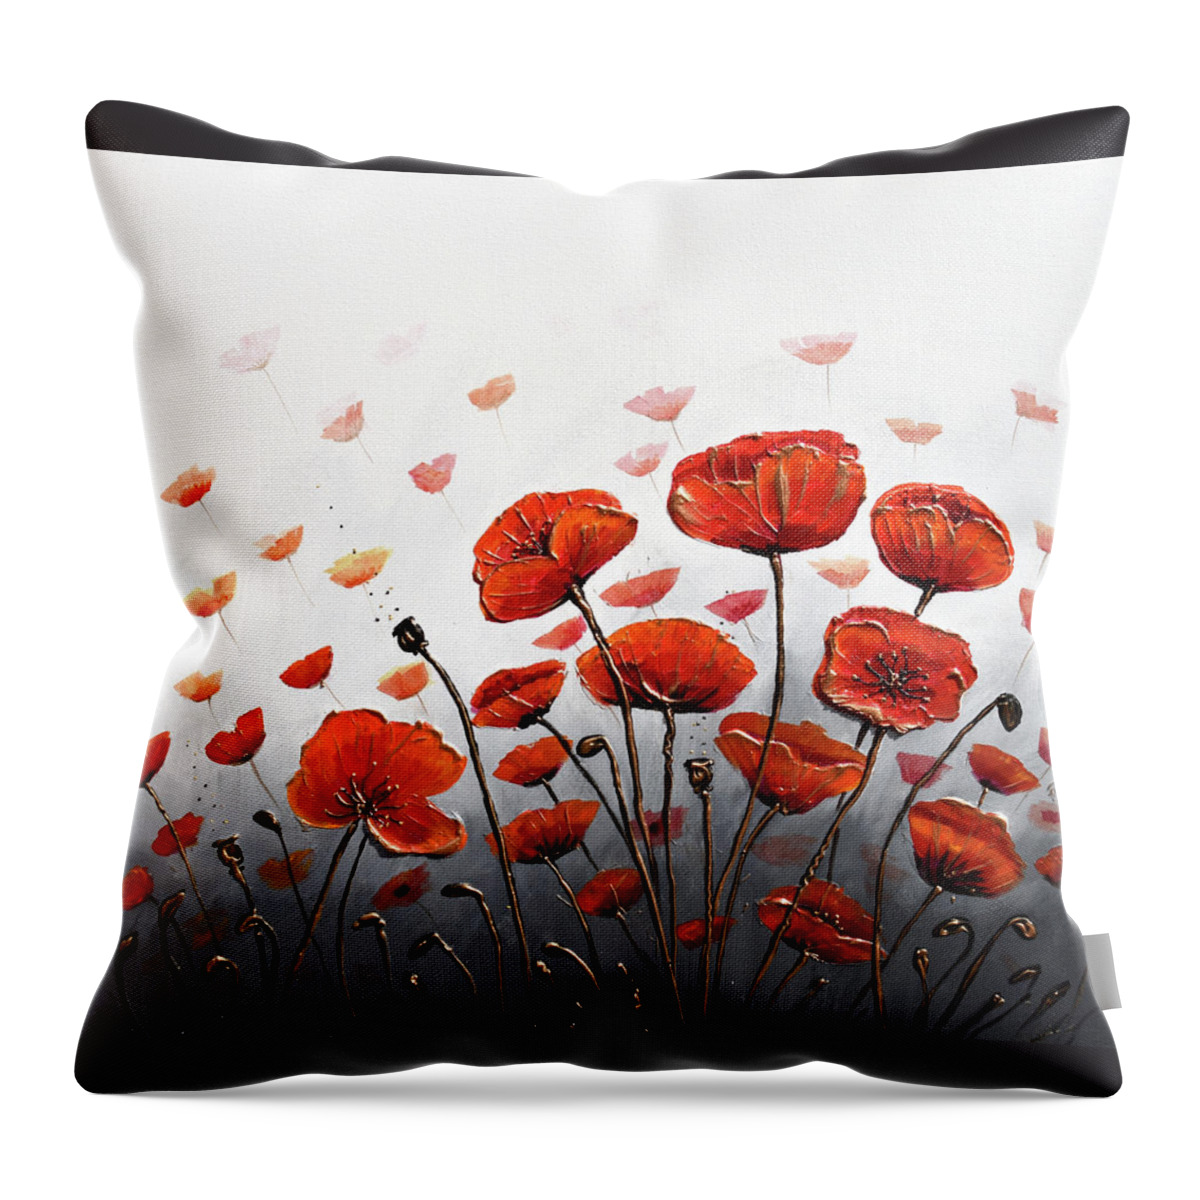 Red Poppies Throw Pillow featuring the painting Poppy Summer Delight by Amanda Dagg